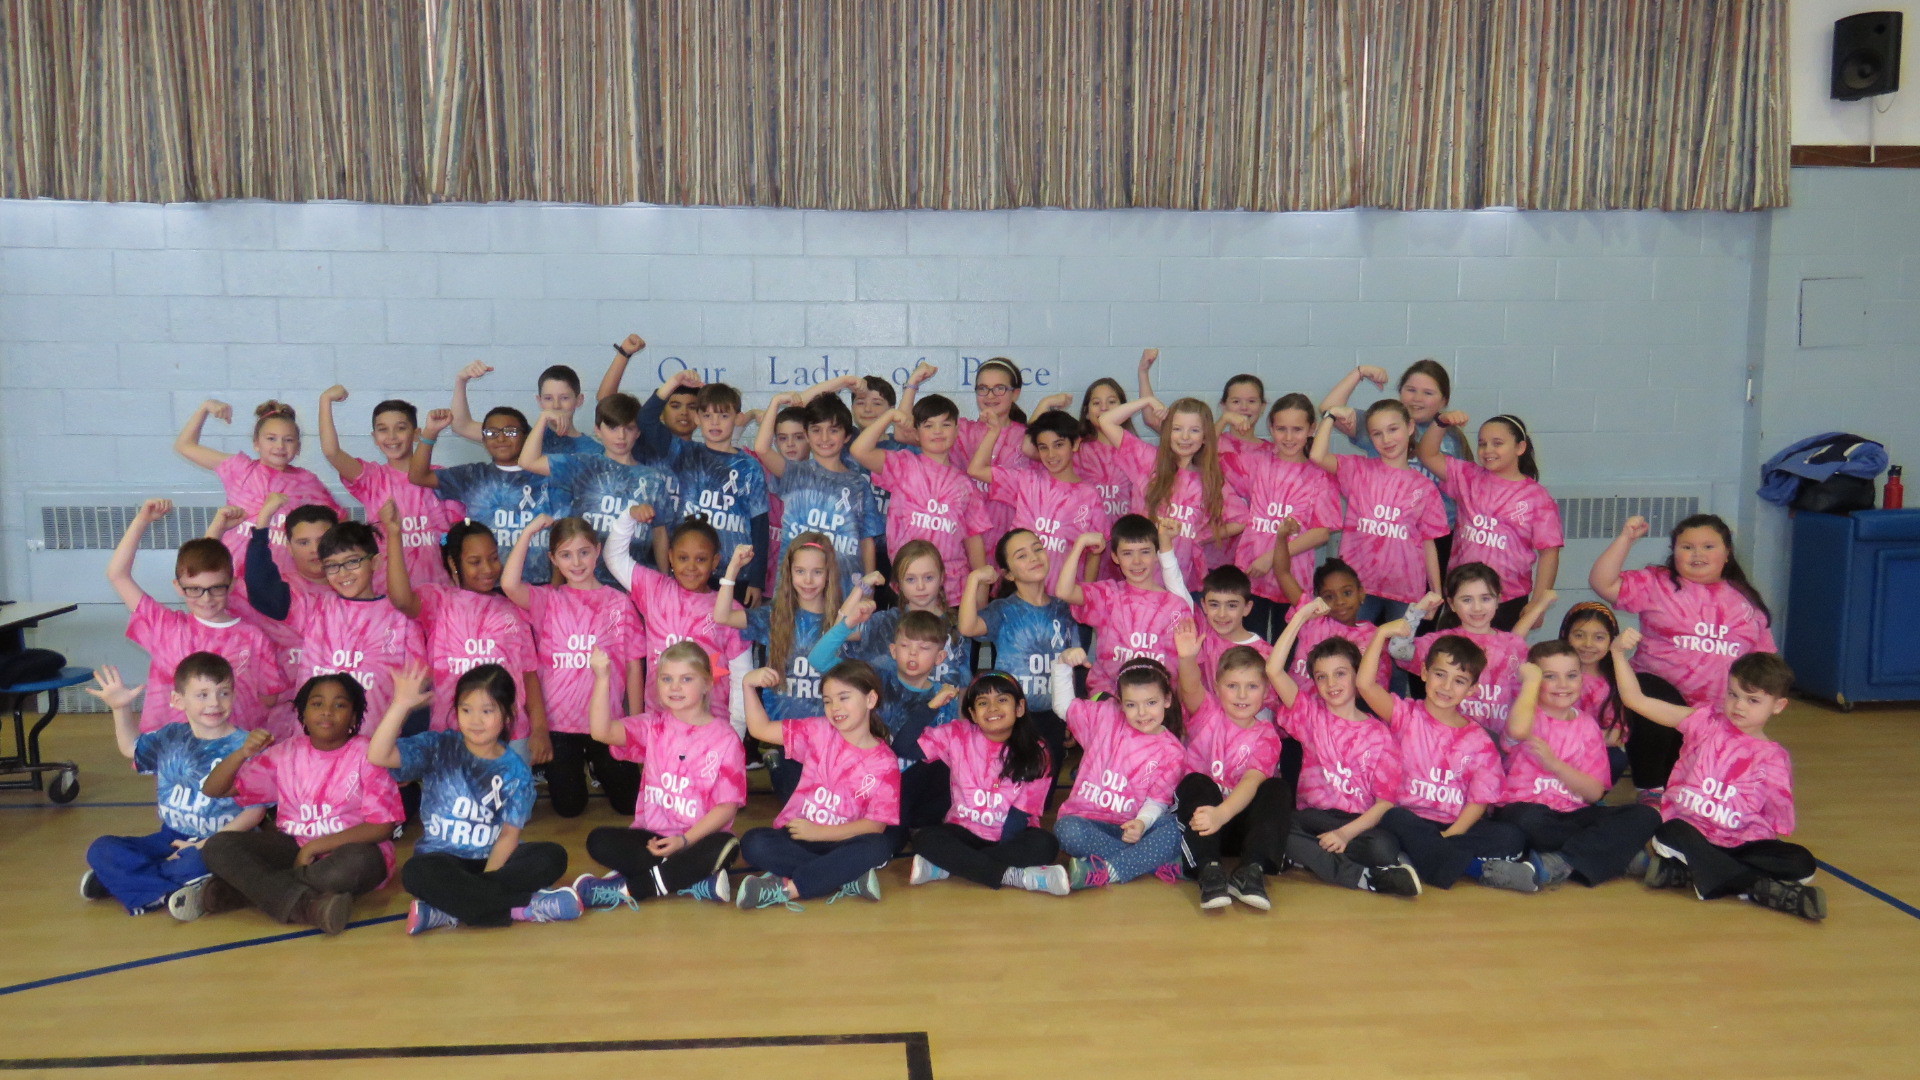 At Our Lady of Peace in Lynbrook, the students wore “OLP Strong” shirts to inspire unity.